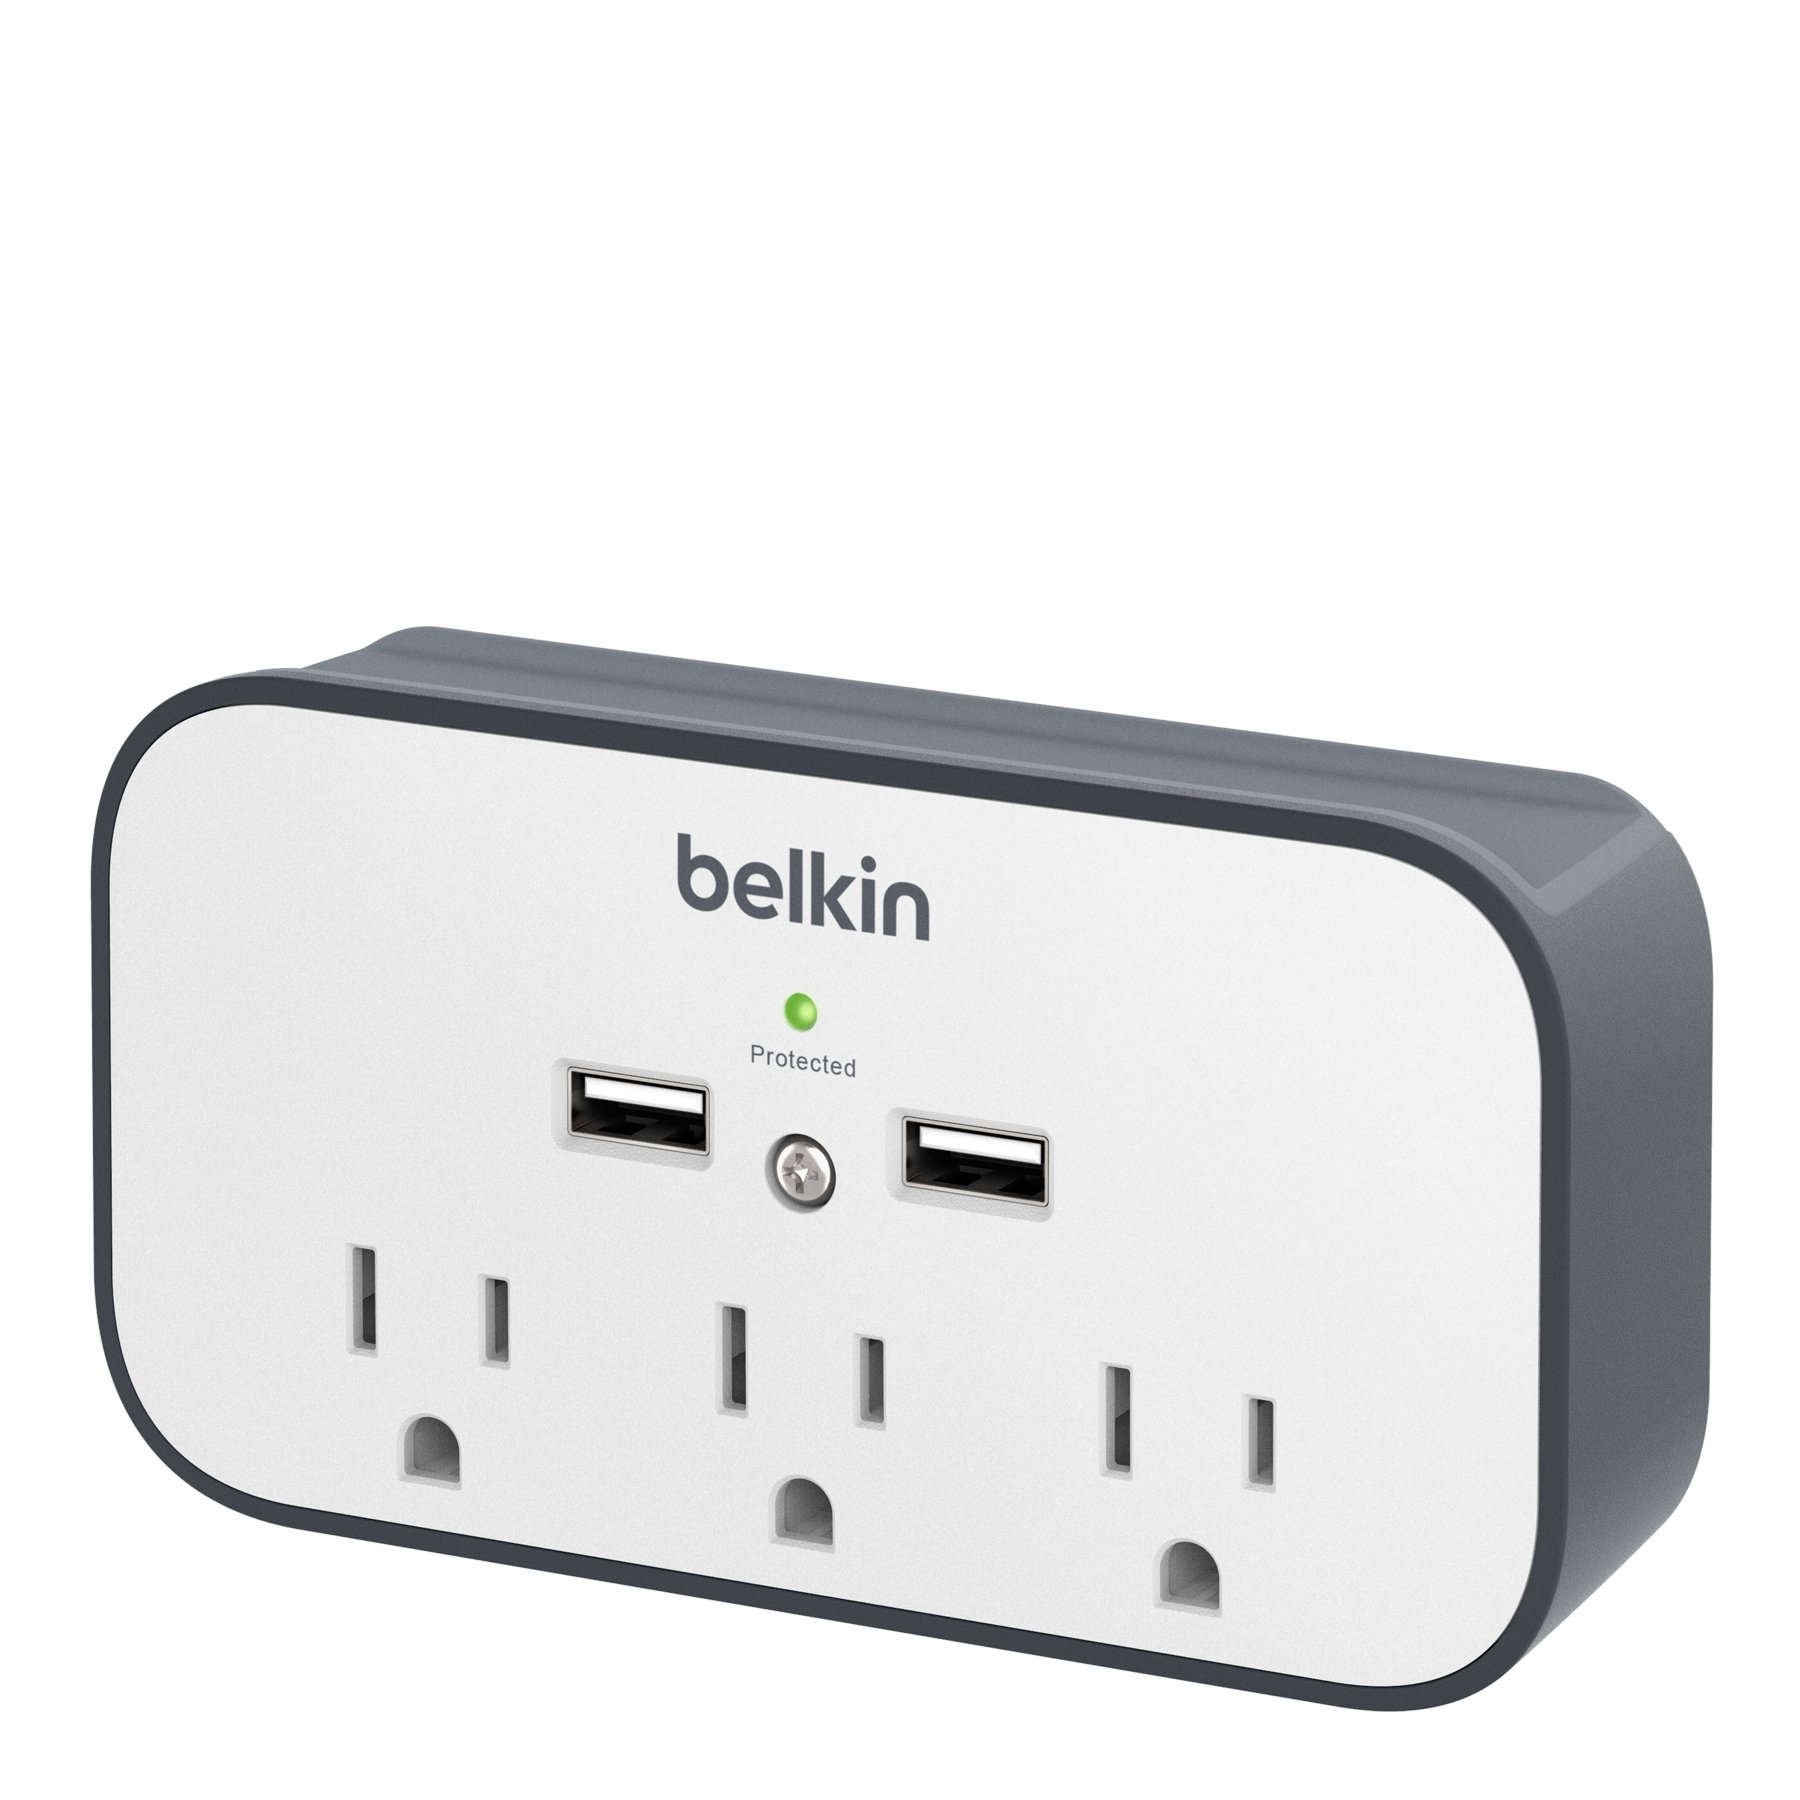 Belkin Wall Surge Protector - 3 Outlet Surge Protector w/ 2 USB Ports - Wall Mount Surge Protector with Premium Protection Against Surges - Safe Charge for Mobile Devices, Tablets & More (540 Joules)